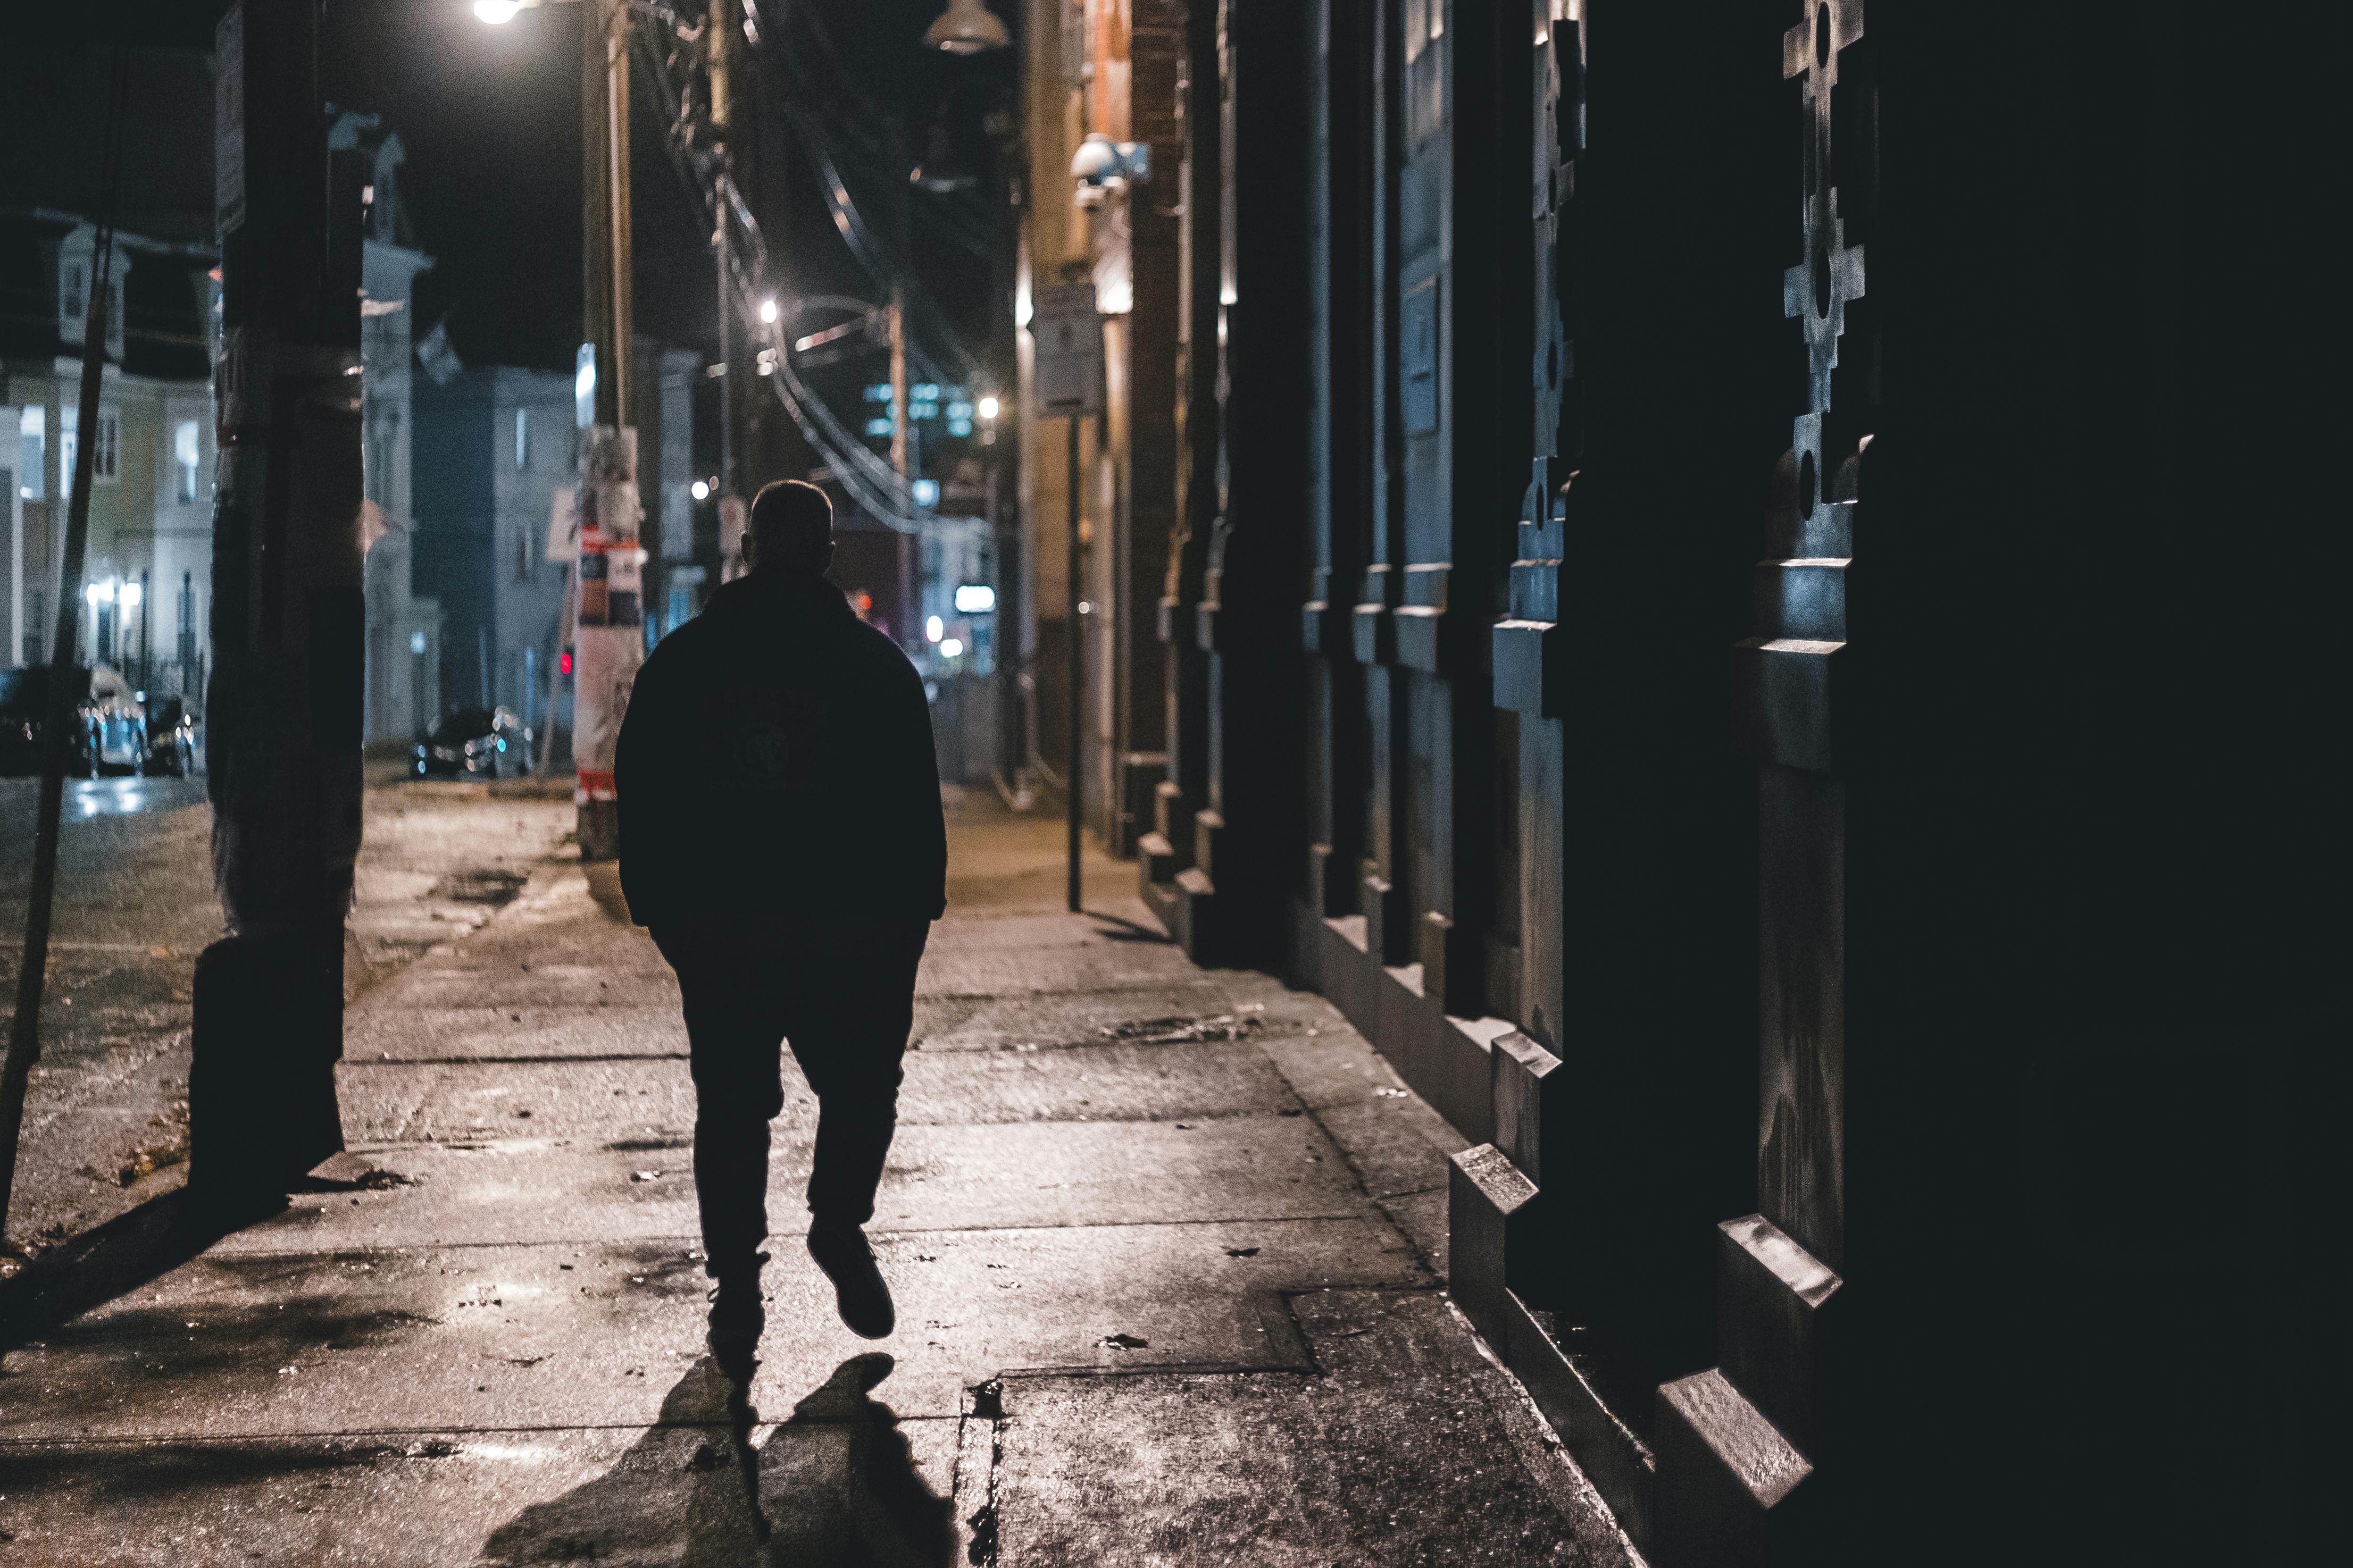 A man wandering the streets late at night. | Photo: Pexels